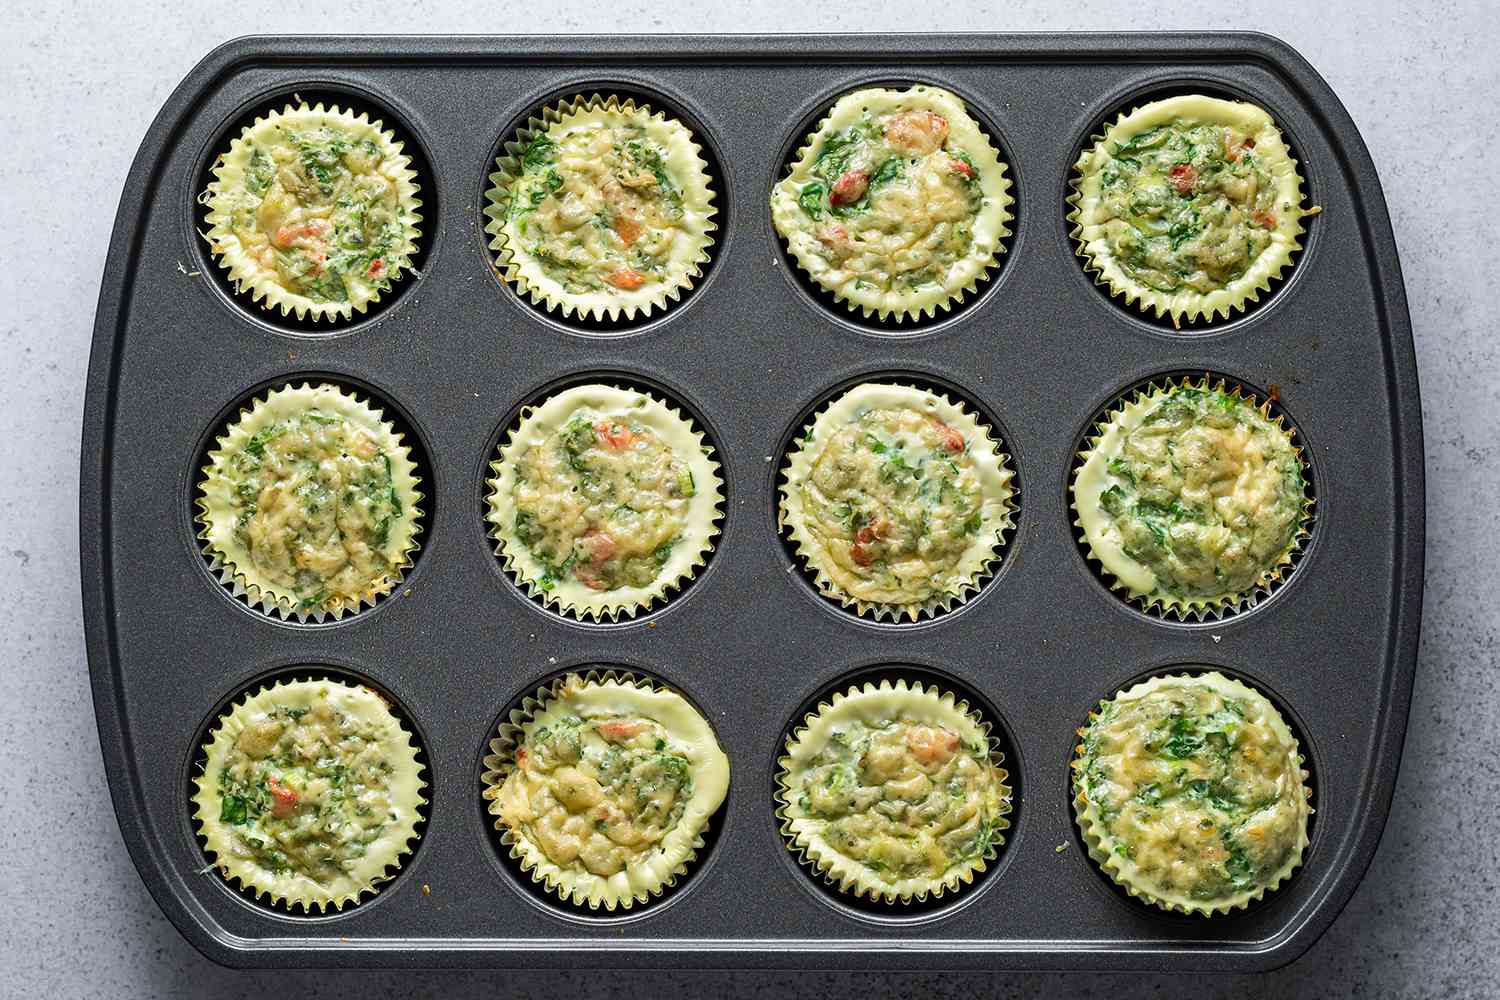 Baked egg white bites in a muffin pan